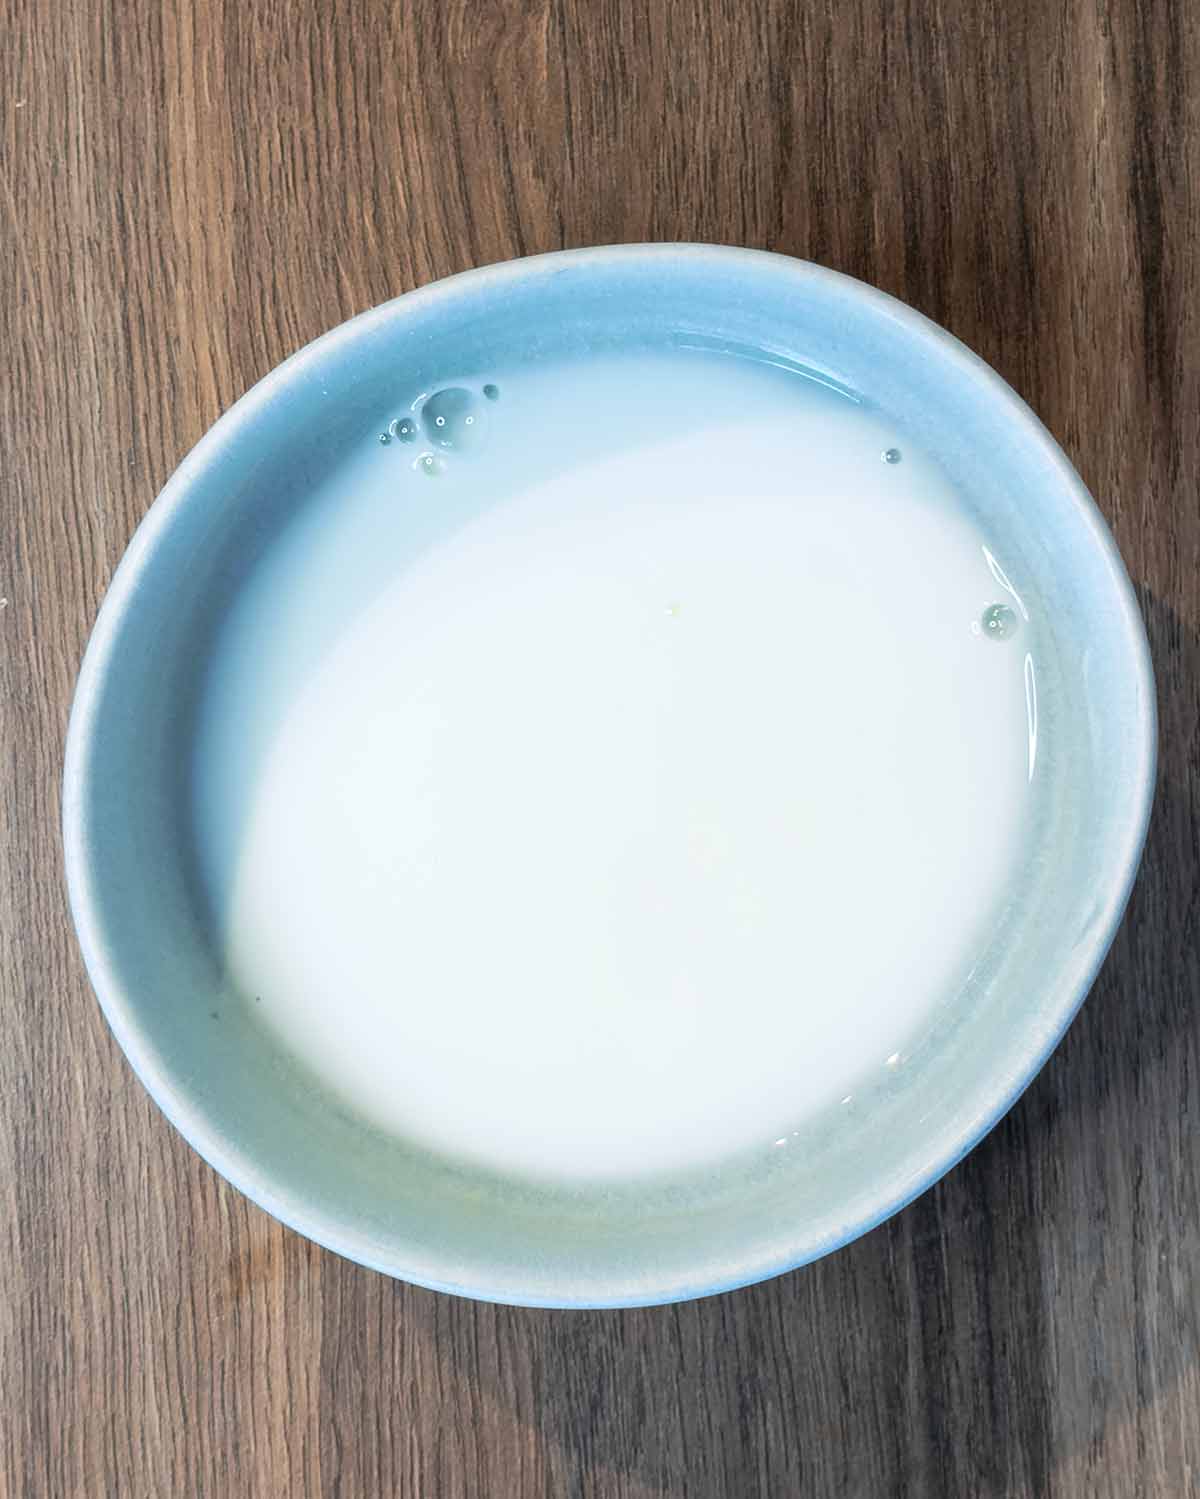 A small bowl containing a milky liquid.